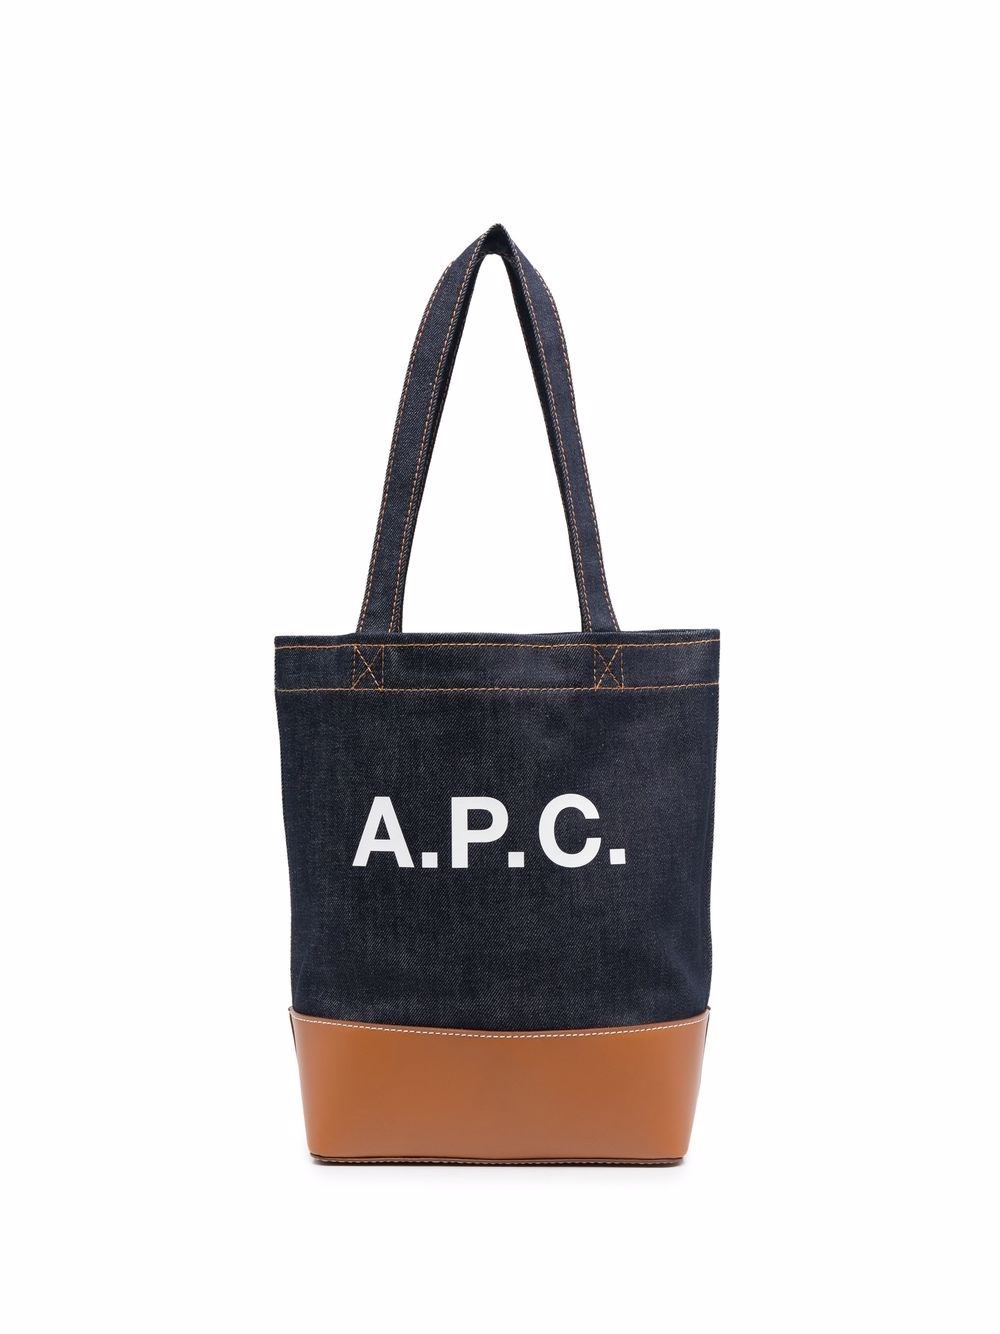 a.p.c. SMALL AXEL TOTE available on montiboutique.com - 52369